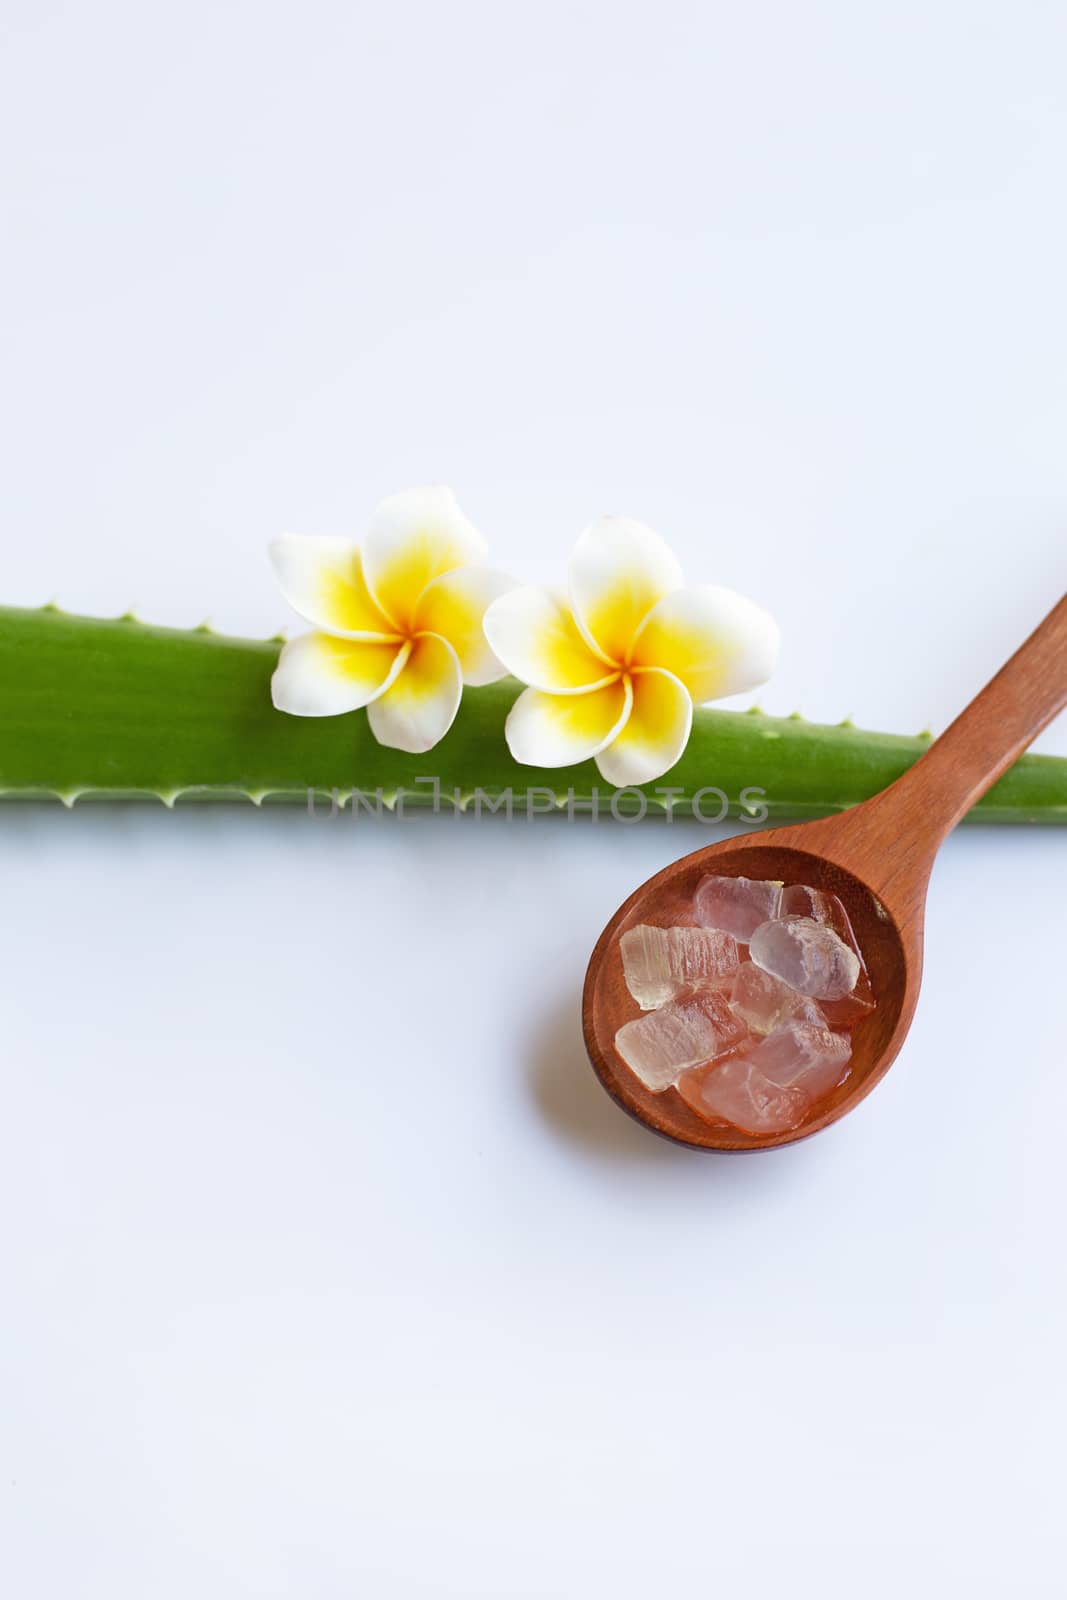 Aloe vera gel in wooden spoon and aloe vera leave with flower on by Bowonpat